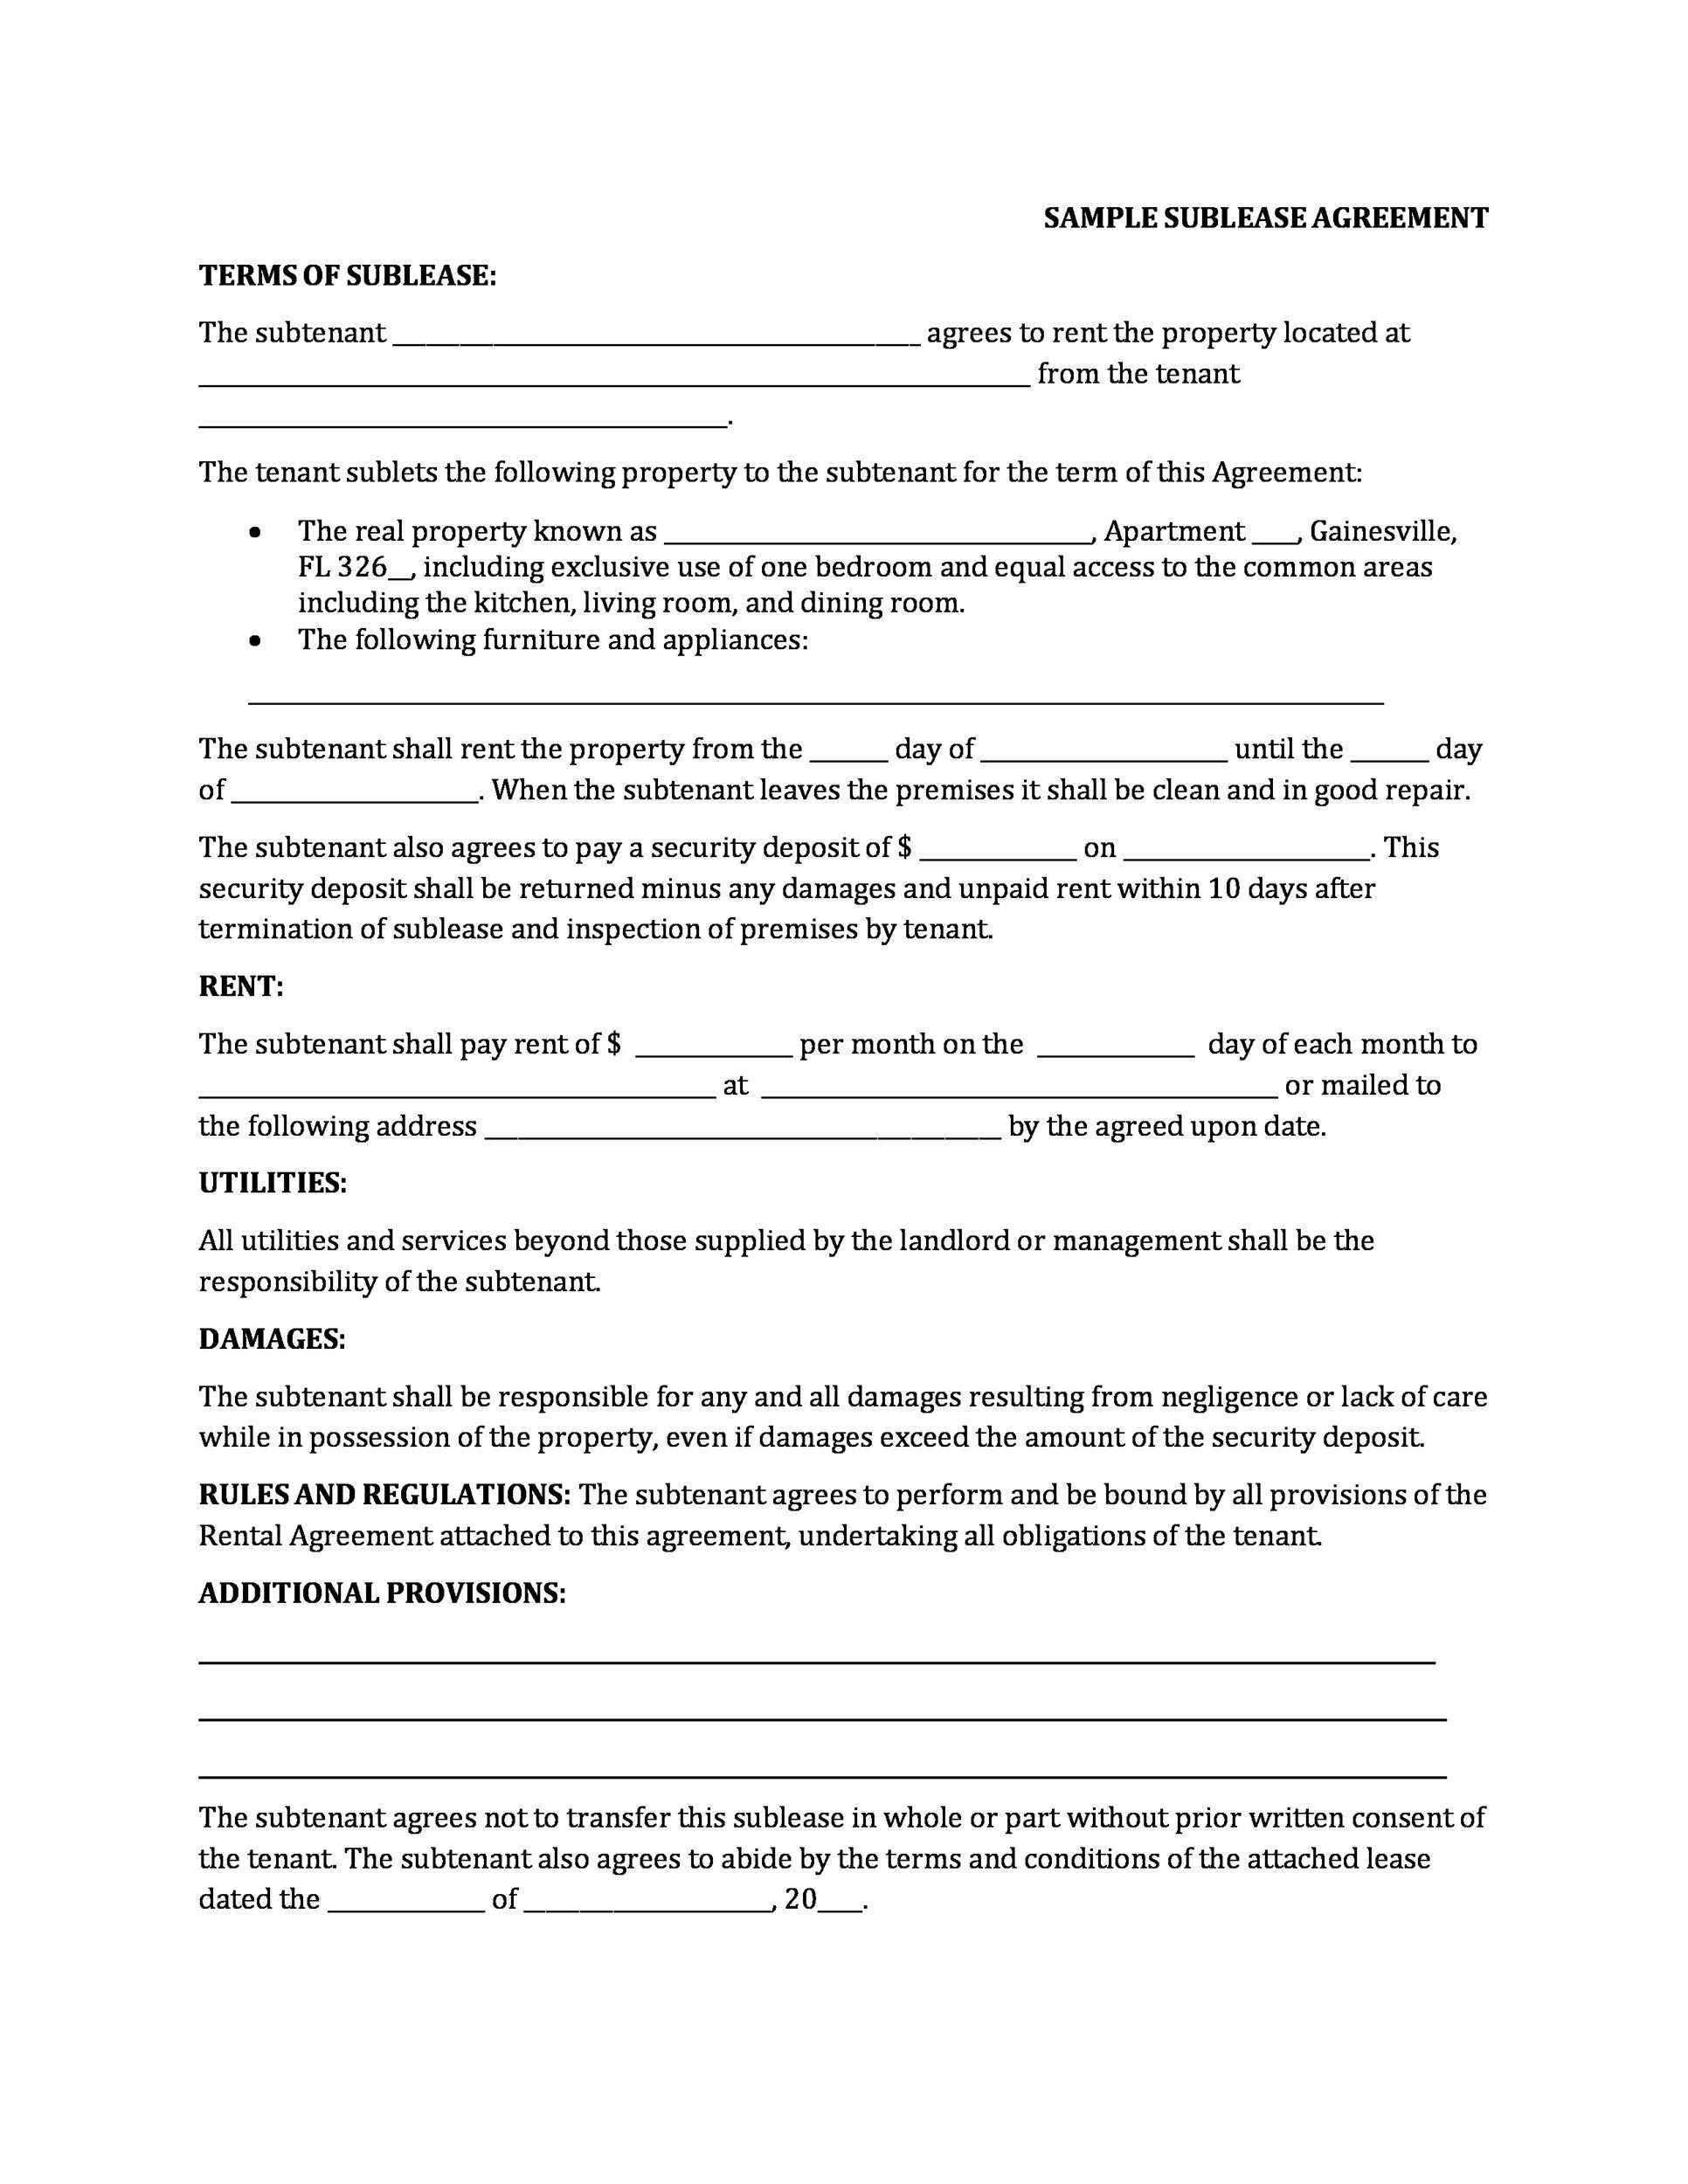 40-professional-sublease-agreement-templates-forms-templatelab